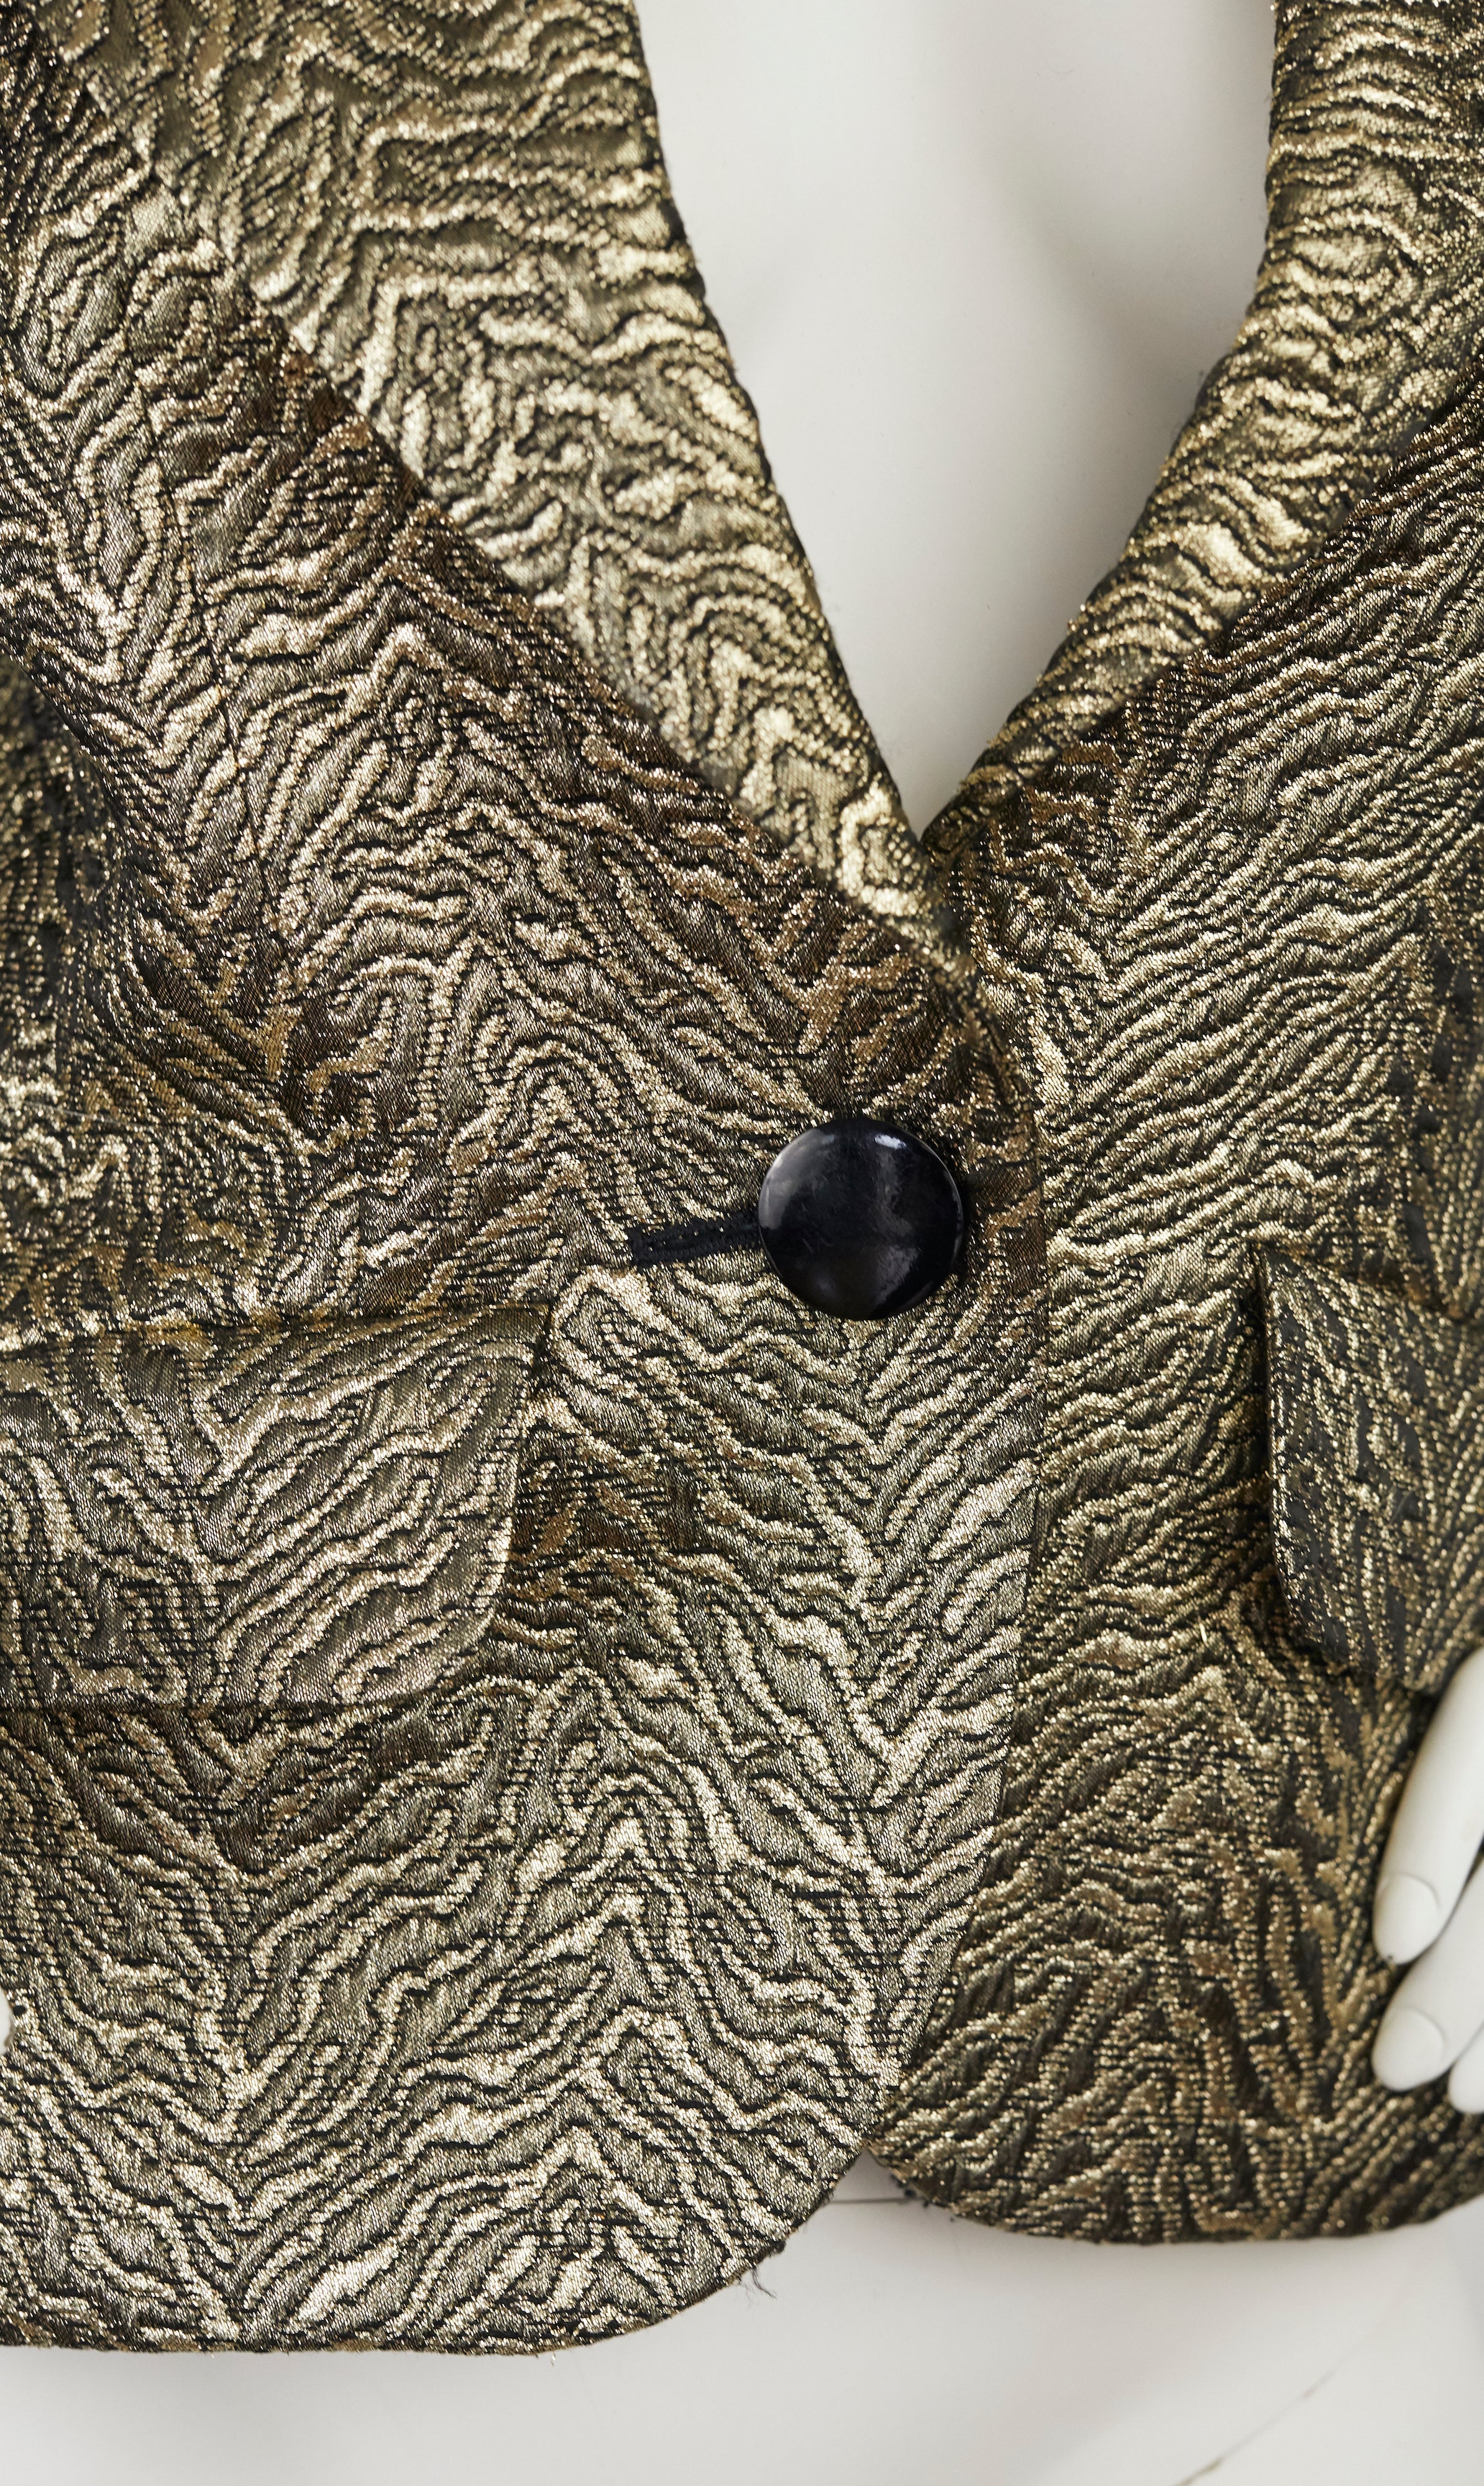 1986-87 F/W Opium Ad Campaign Gold Brocade Jacket